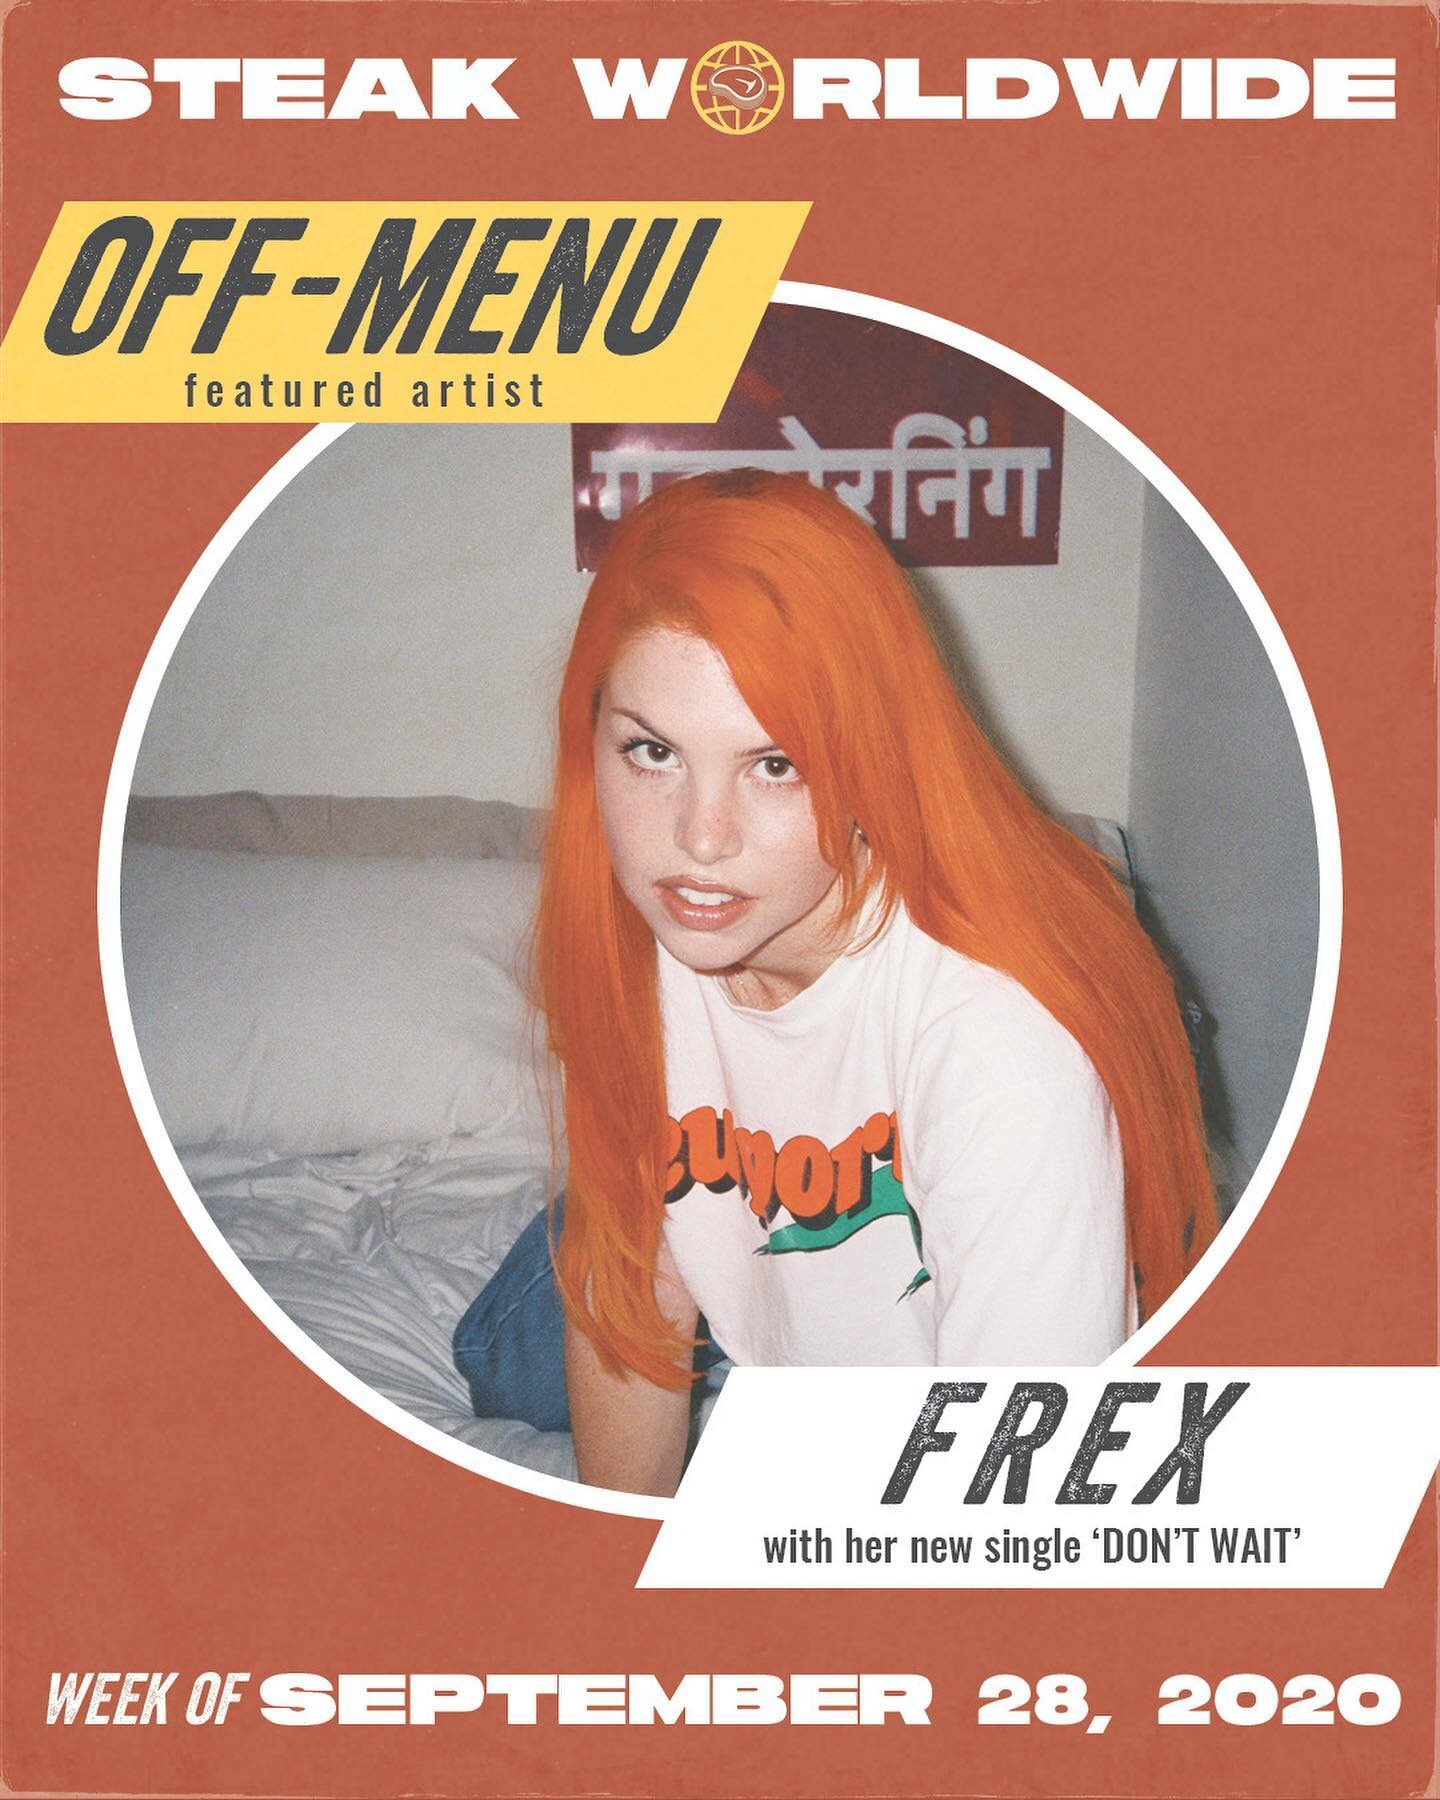 If you haven't already been put on to @youngfreckle 's music, now is the time 🔥 This week's Off Menu feature is highlighting Frex new single &quot;Don't Wait&quot; available to stream on all platforms 🚨📈